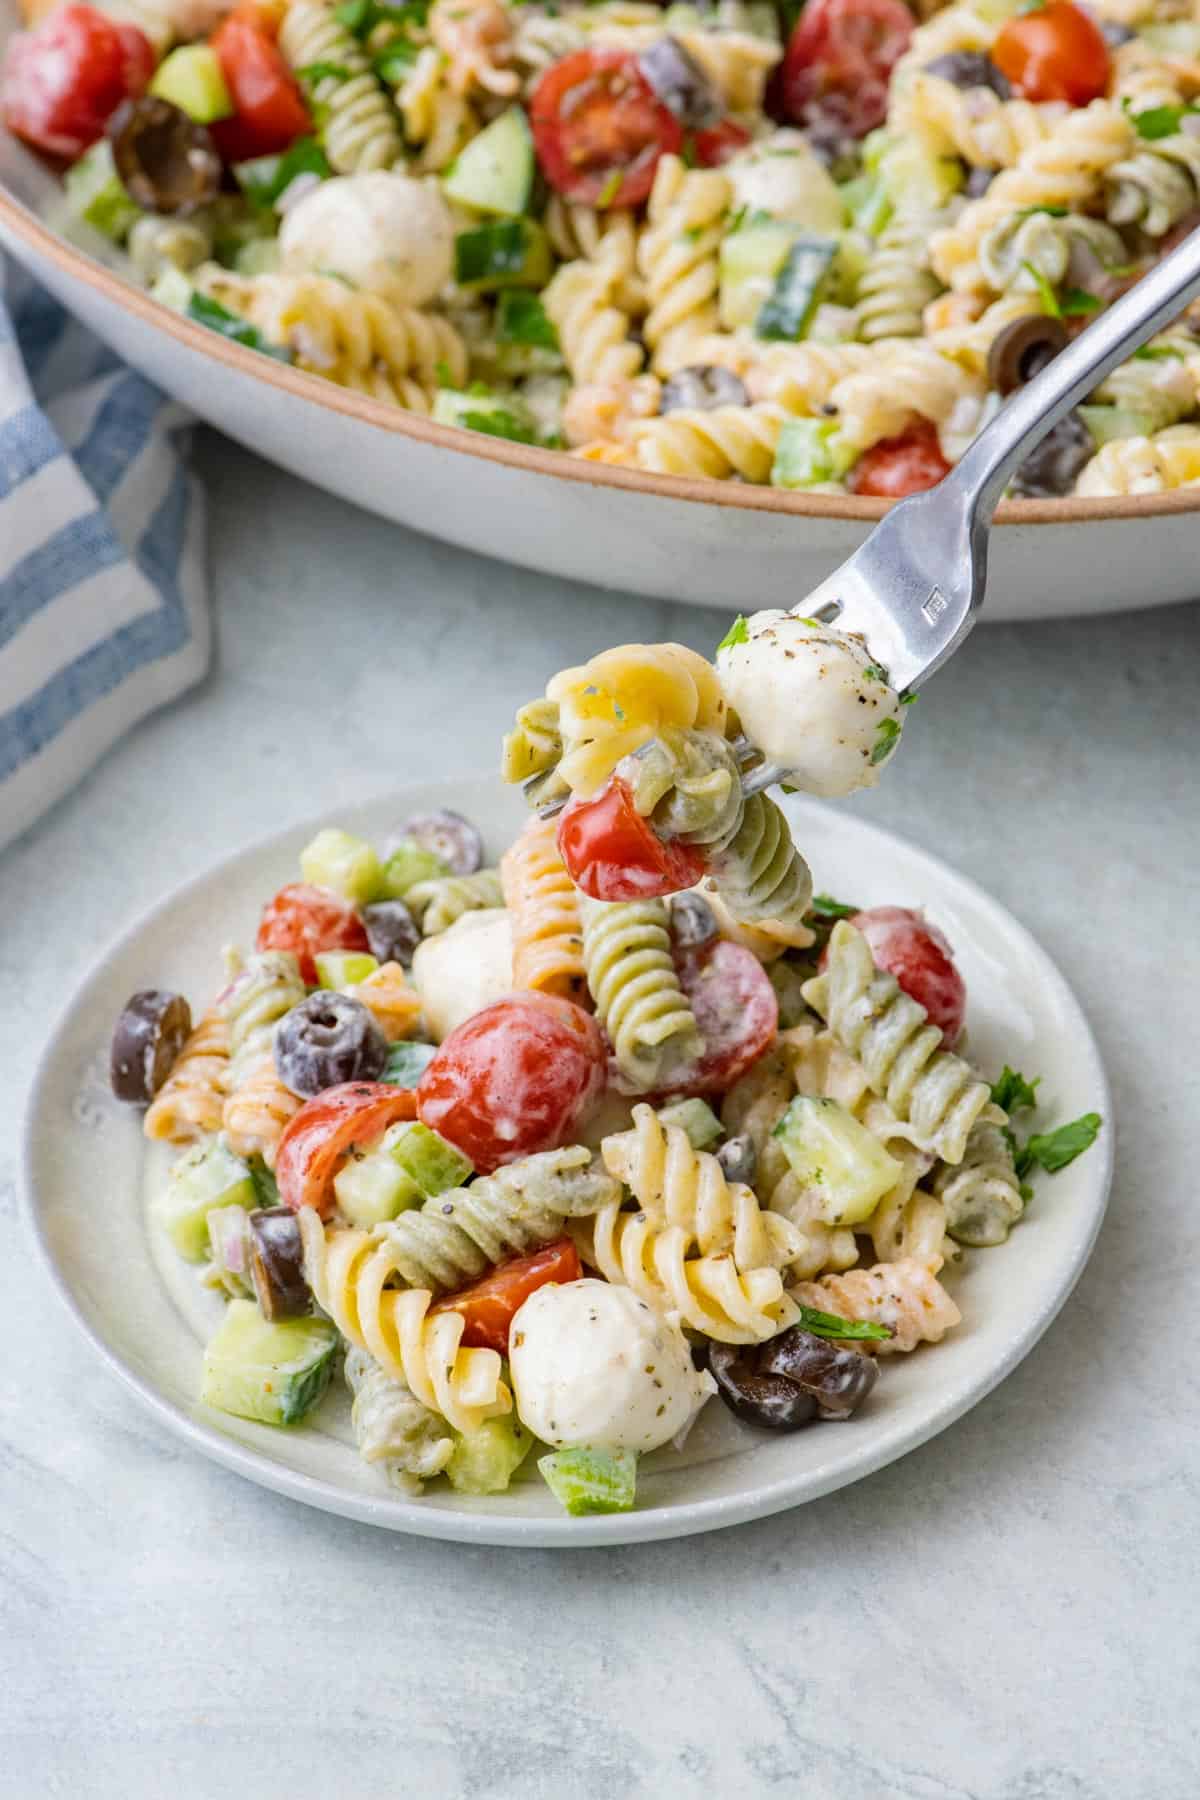 A serving of Italian pasta salad on a small plate with the serving bowl nearby. A fork is lifting up a bite.